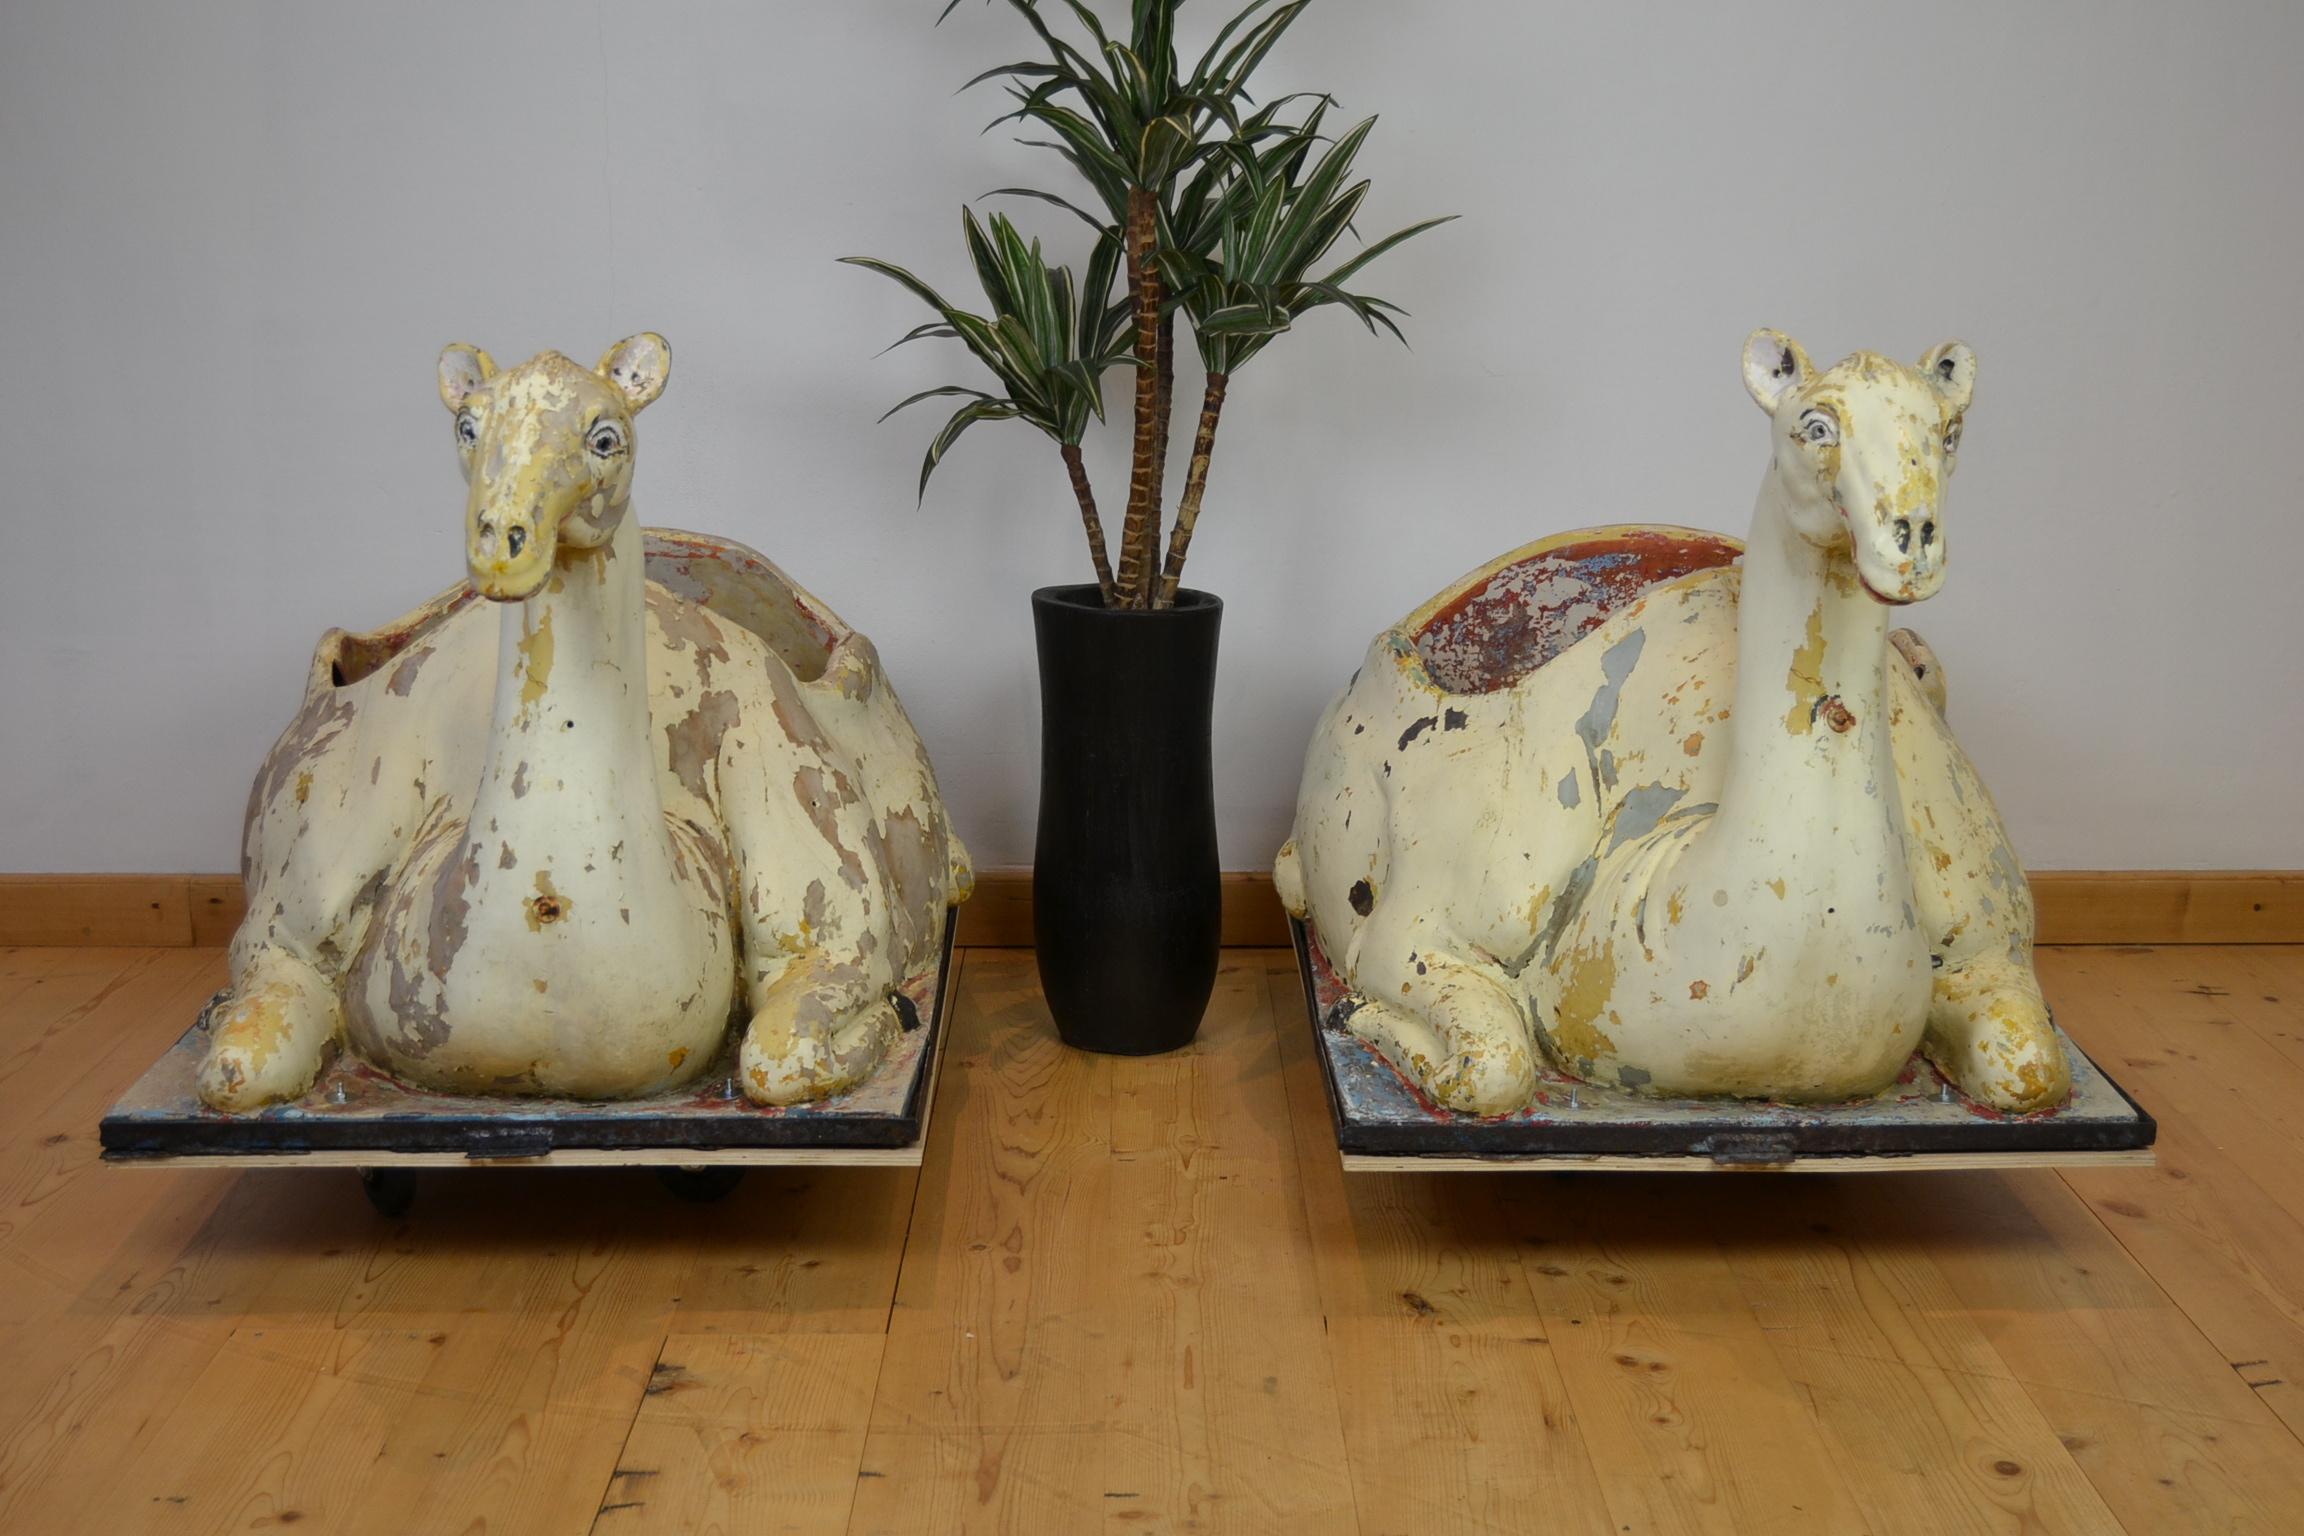 Spectacular carousel camel animals - 2 pieces available.
 
These 2 large lying camel sculptures are eye-catching.
They date circa 1970s and do have an aged patina in the meantime, 
what makes them just that charming.

These vintage ship of the